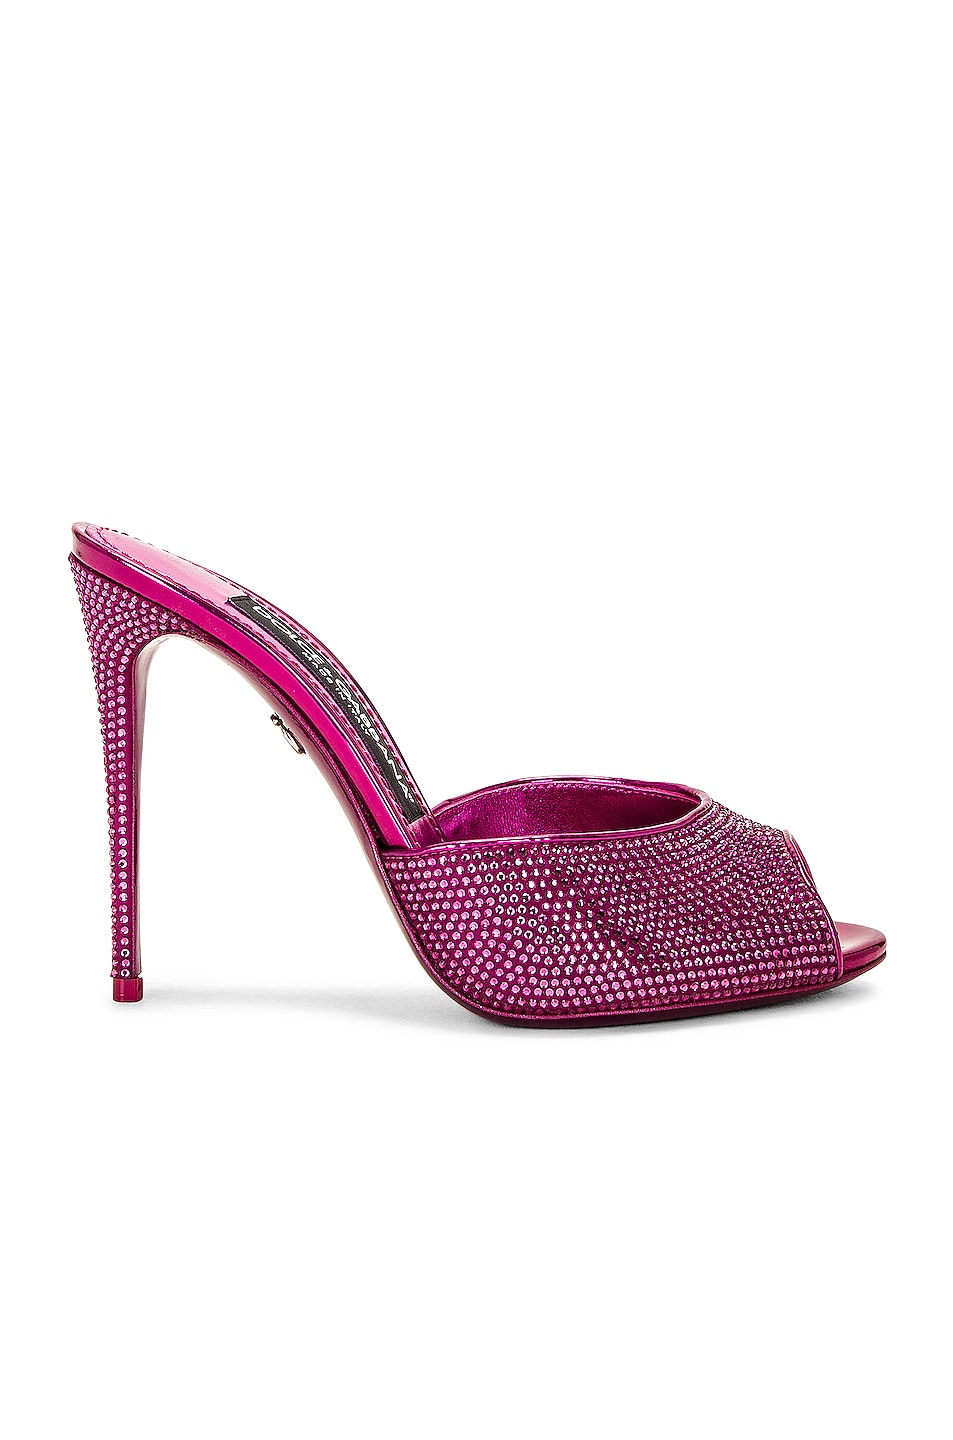 Image 1 of Dolce & Gabbana Keira Mule in Bouganville & Fuxia